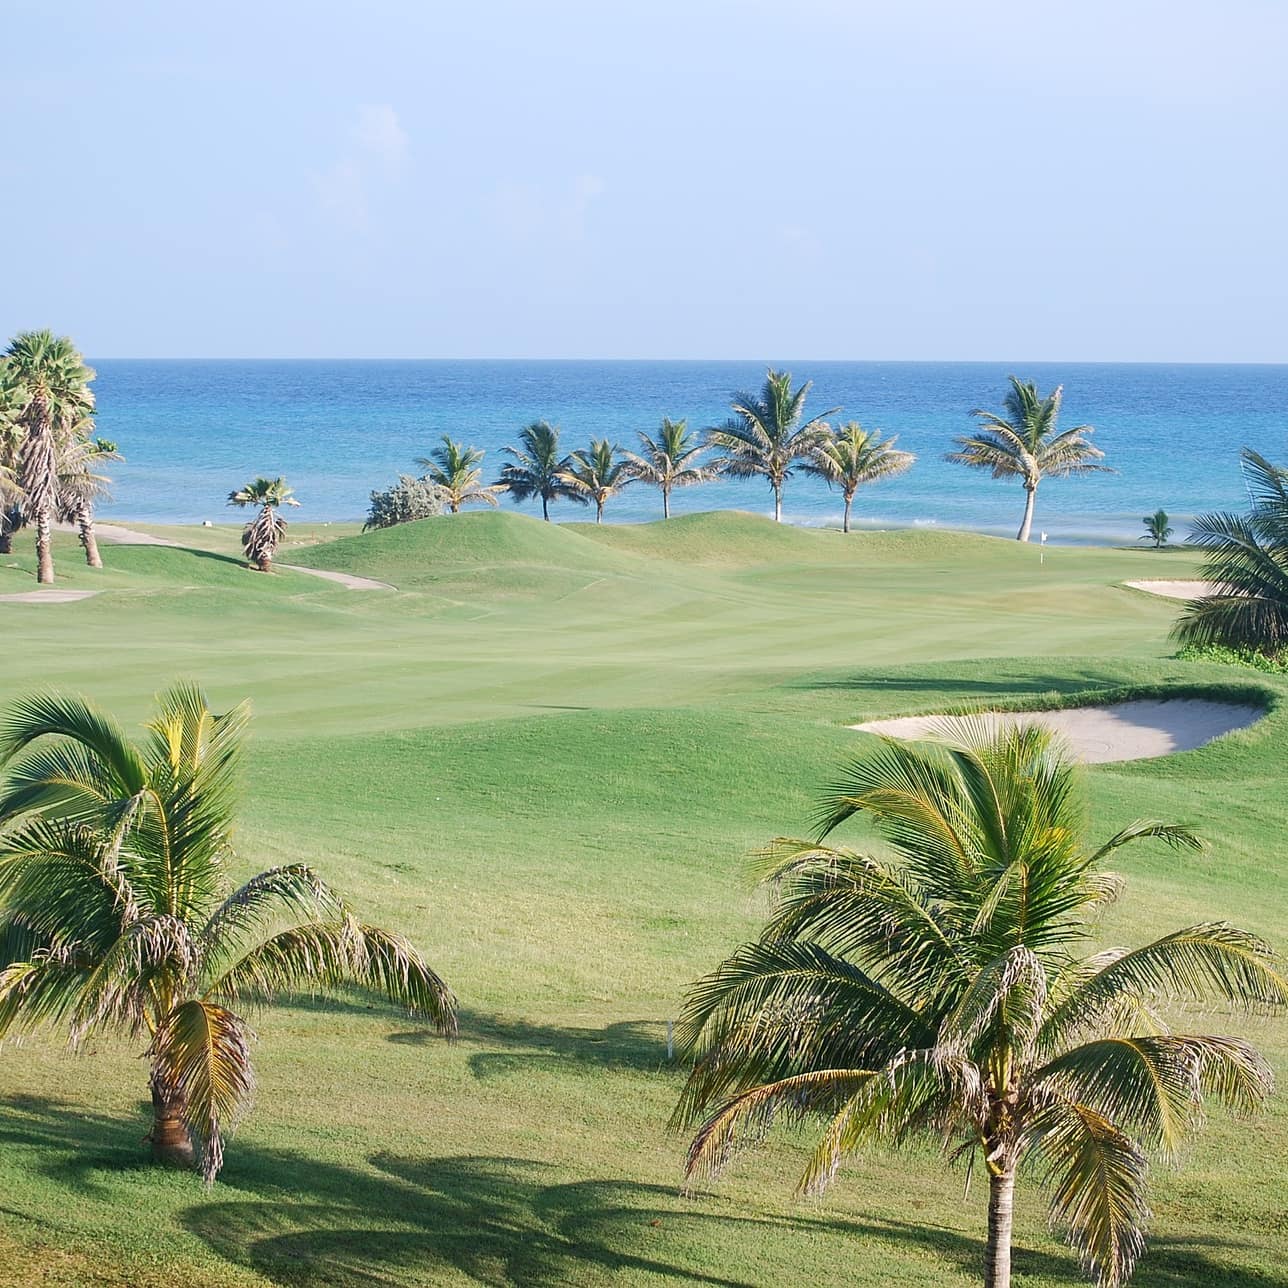 A golf resort with palm trees by the sea